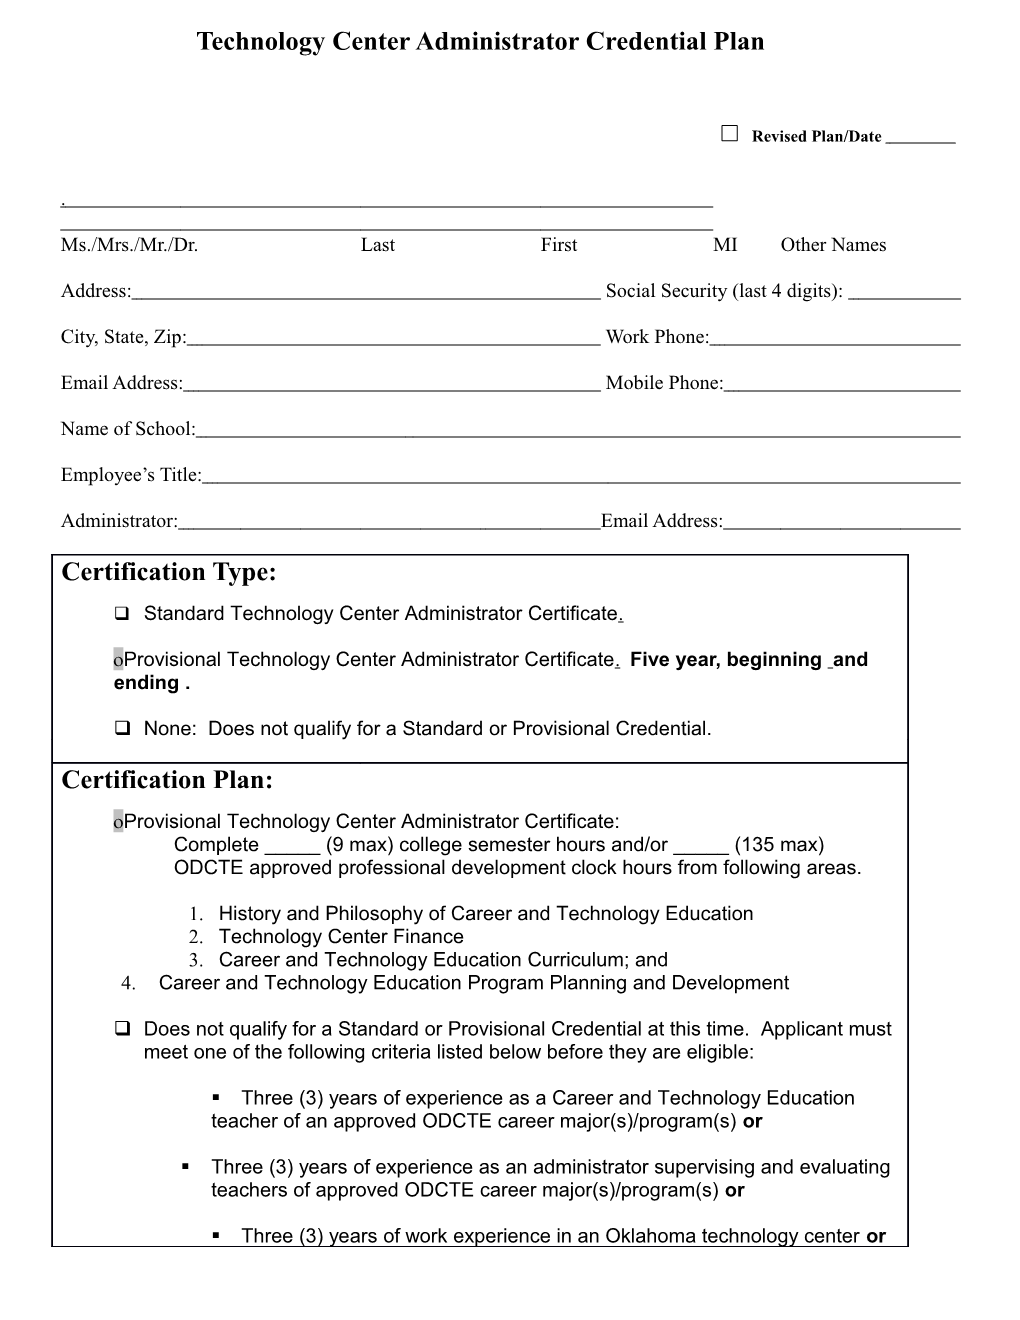 Technology Center Administrator Credential Plan